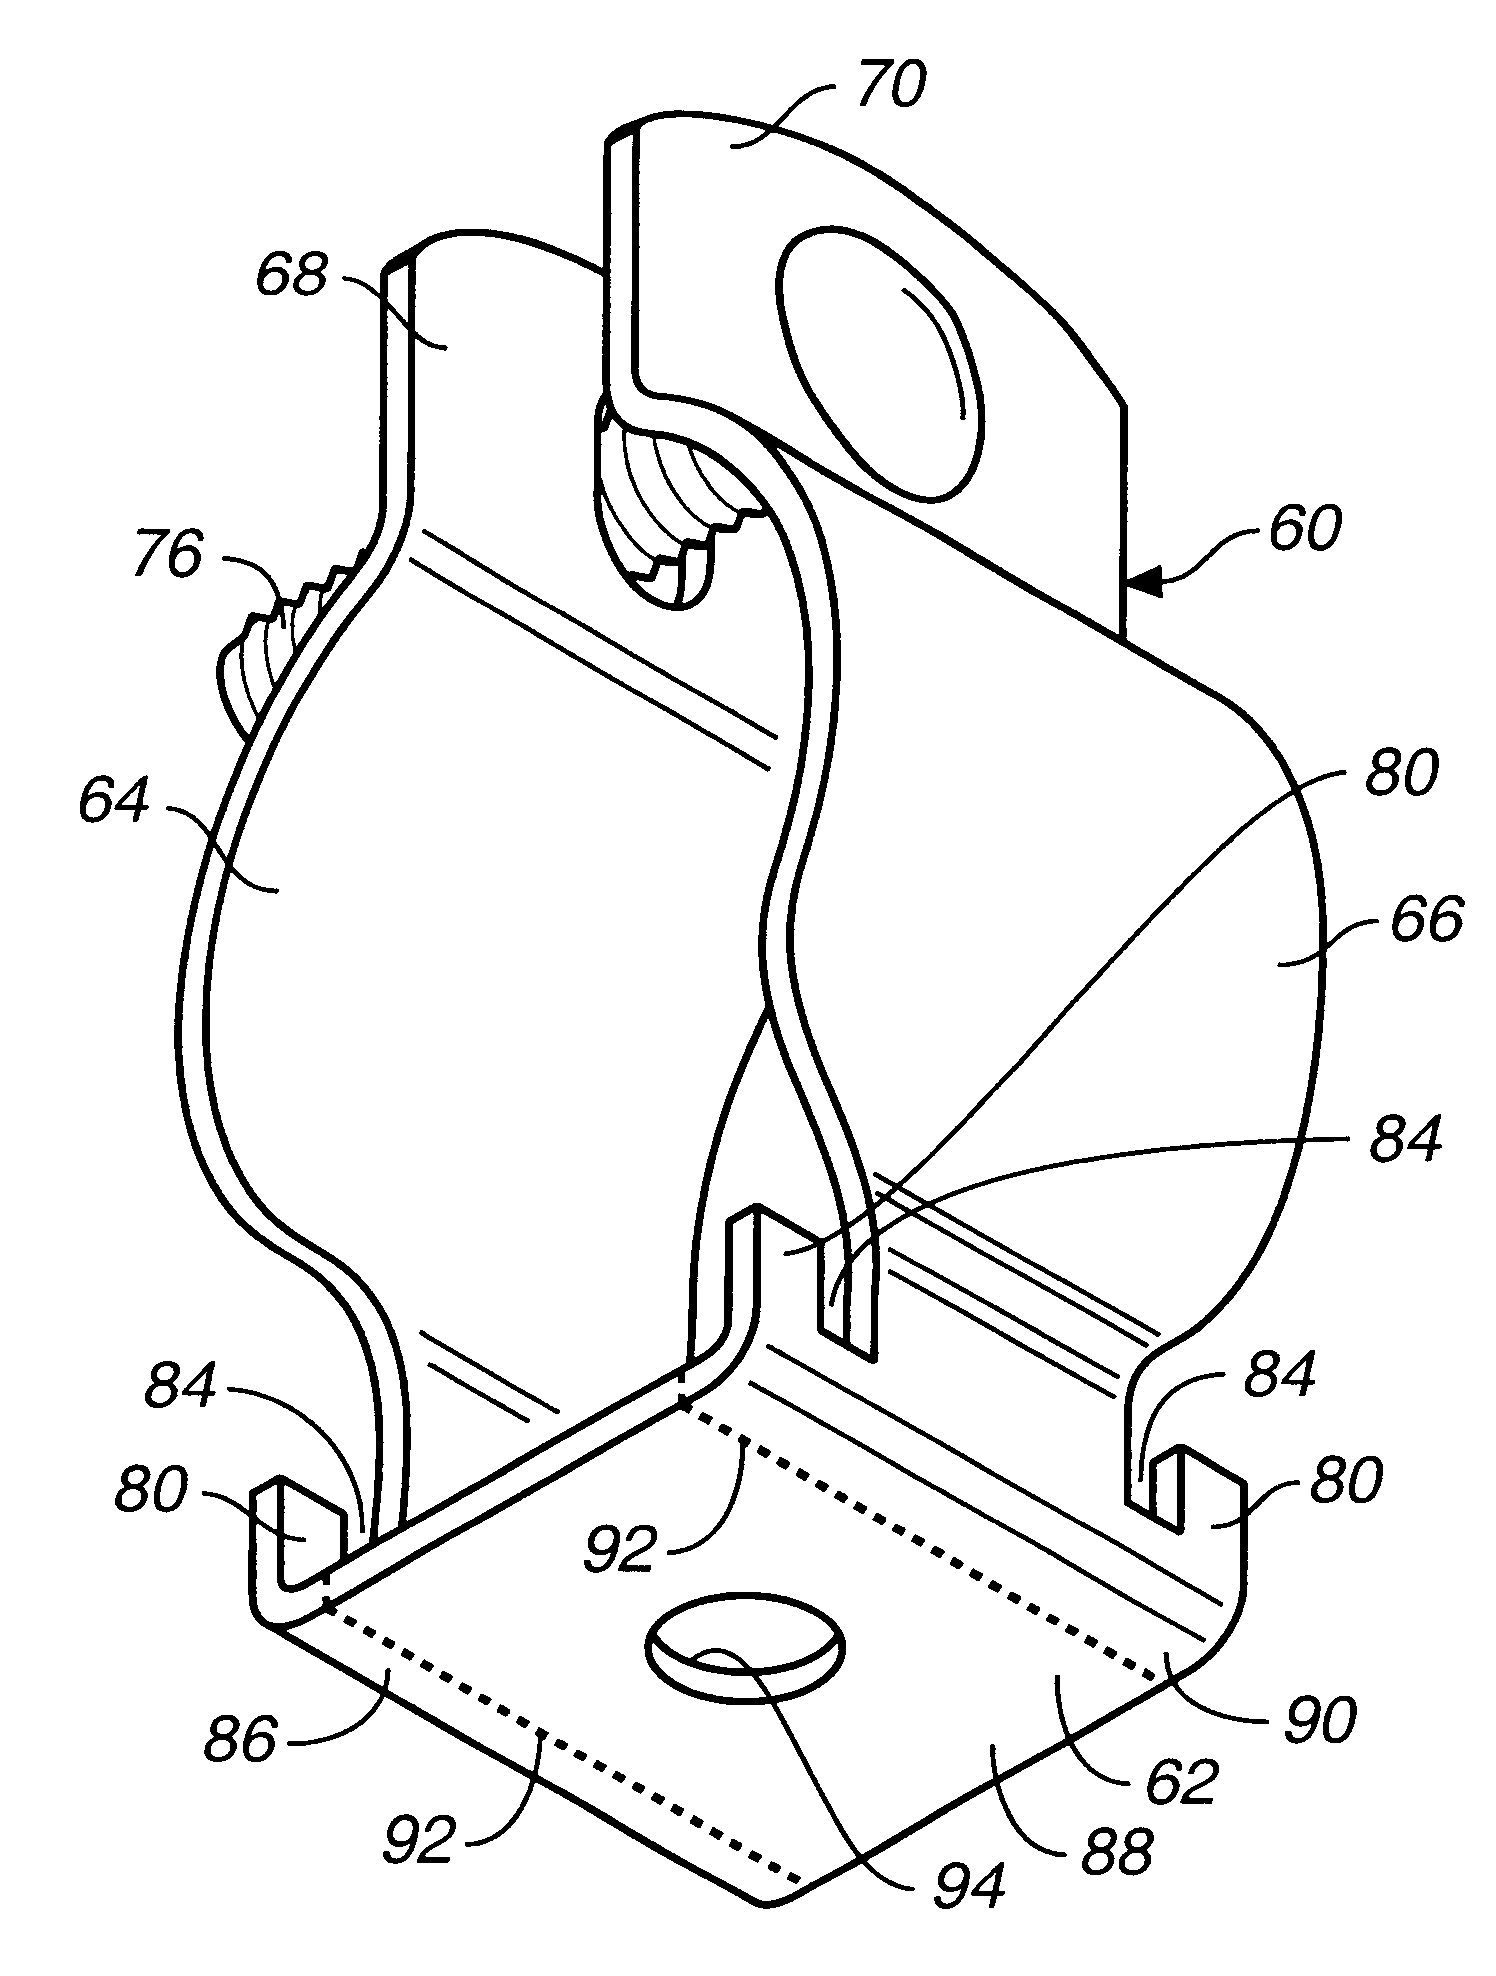 Multi-purpose hanger apparatus for use with a building structure